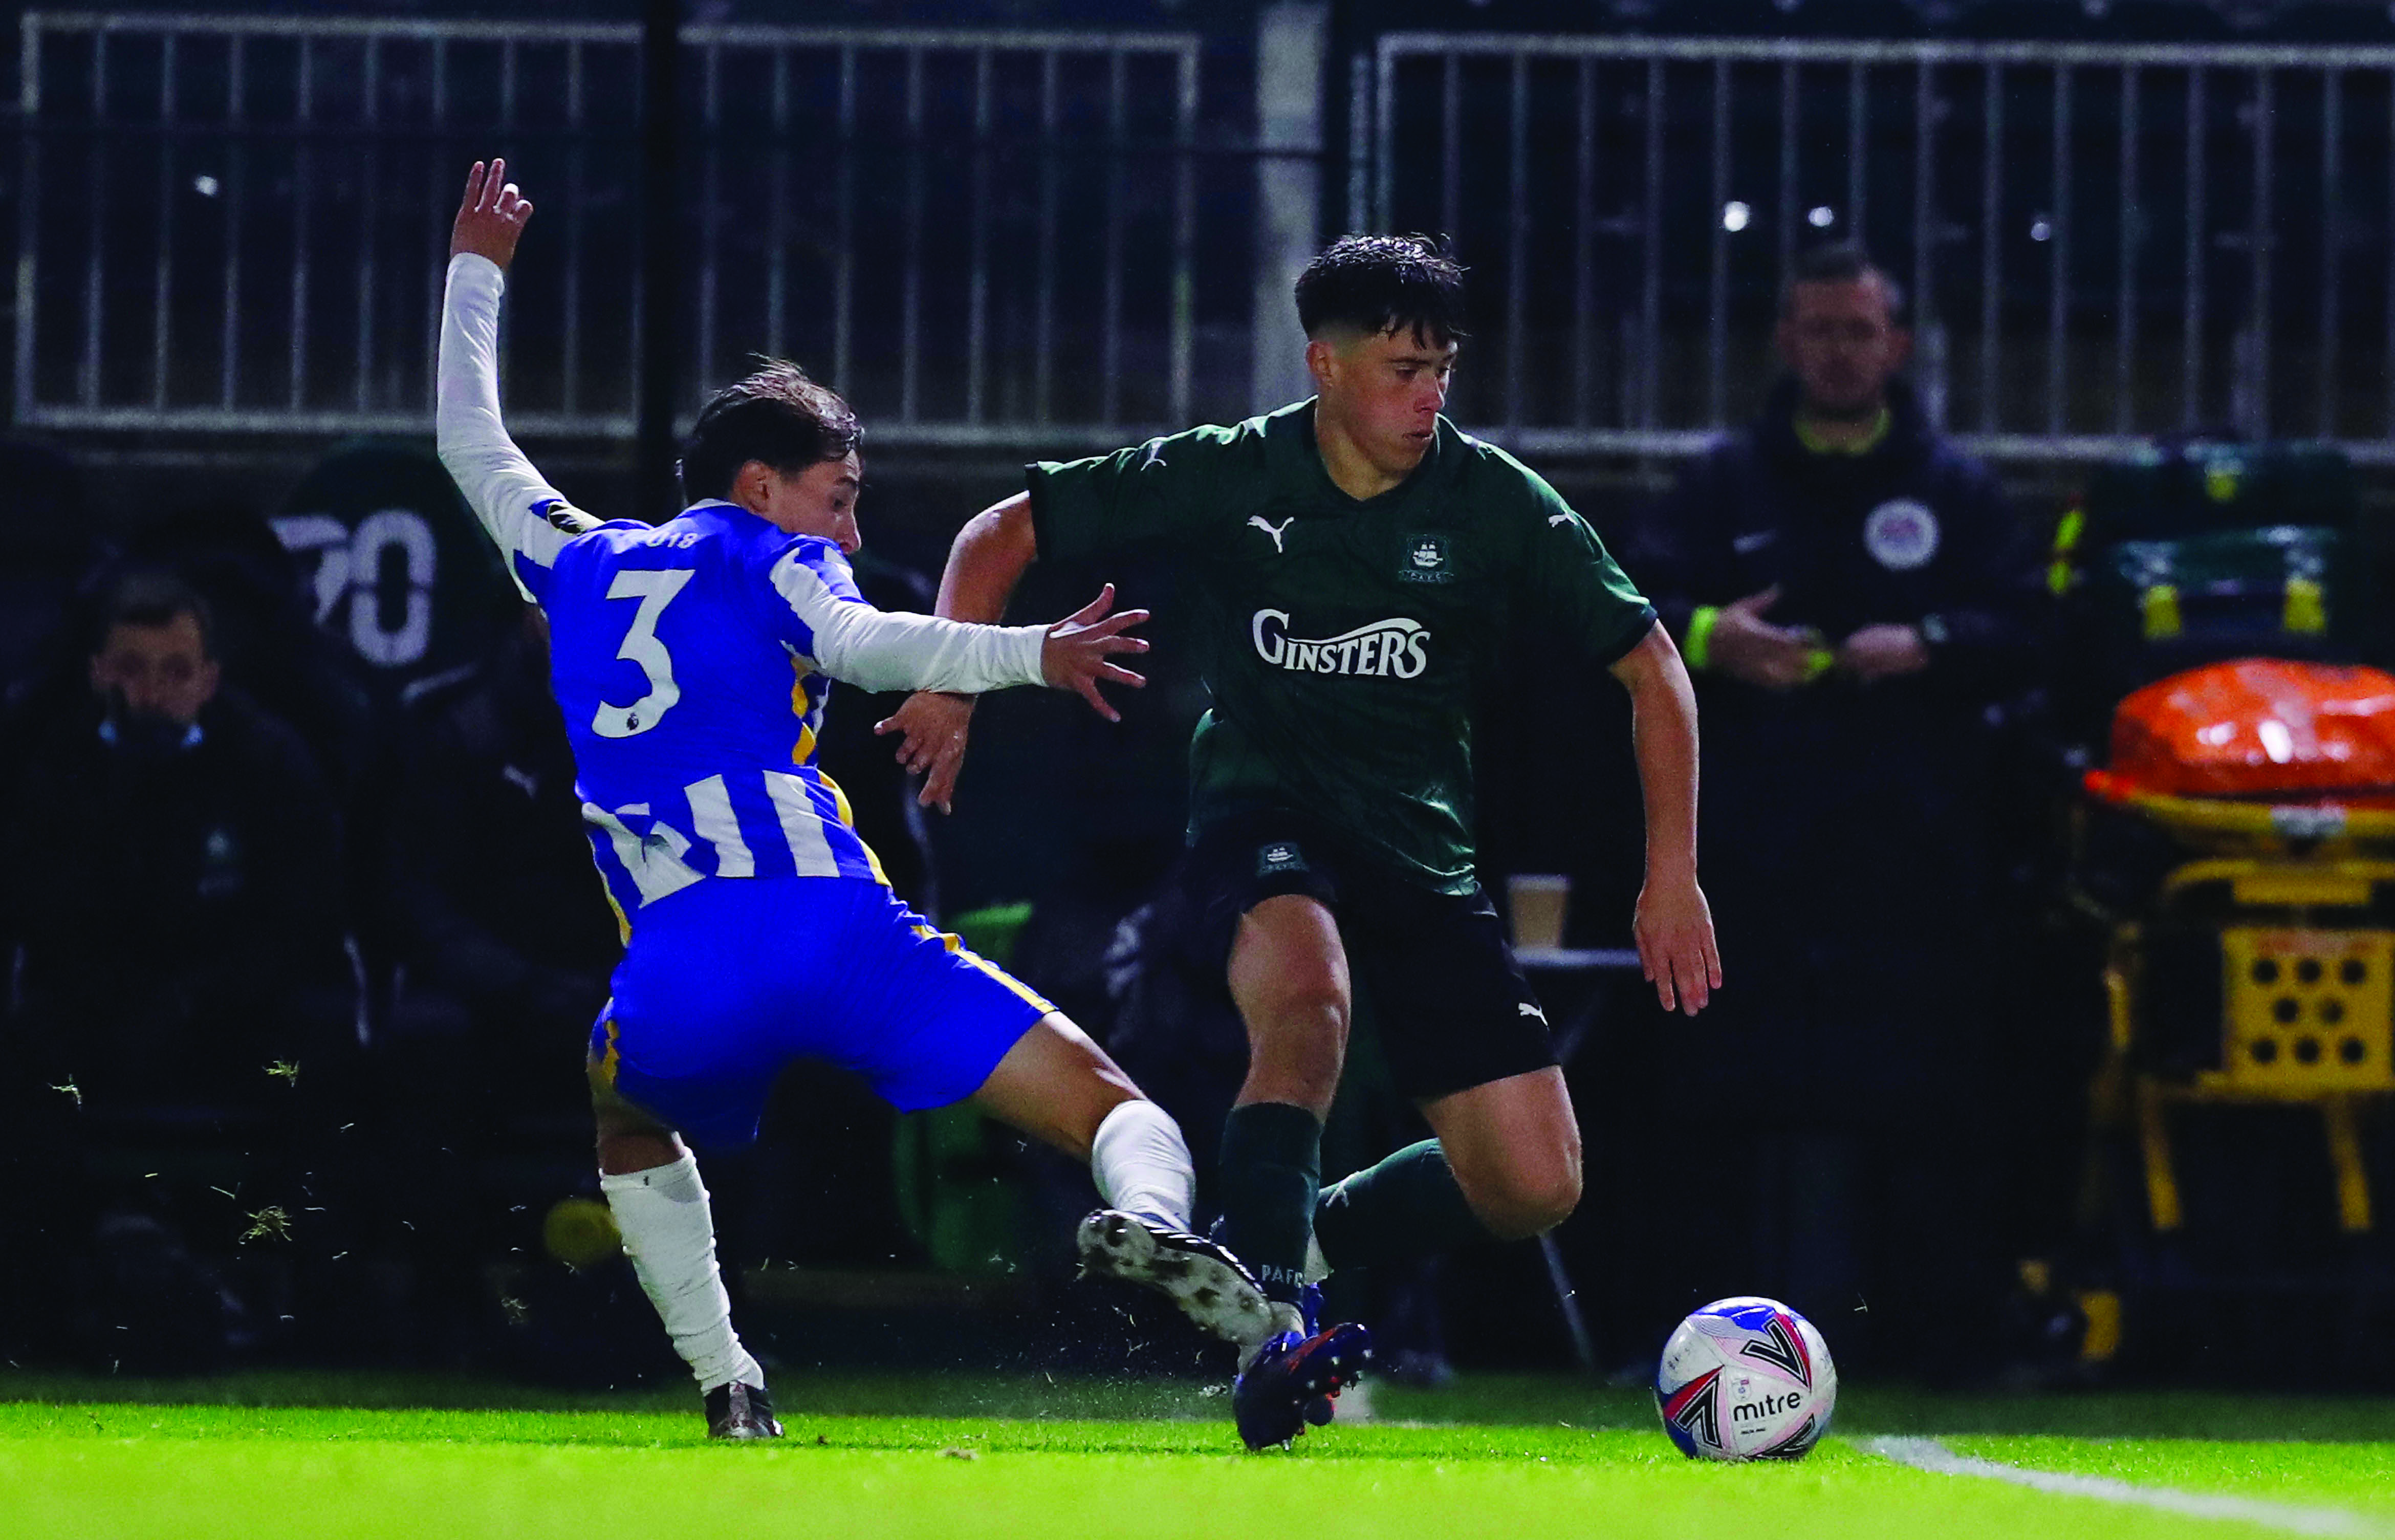 Oscar Rutherford in the FA Youth Cup